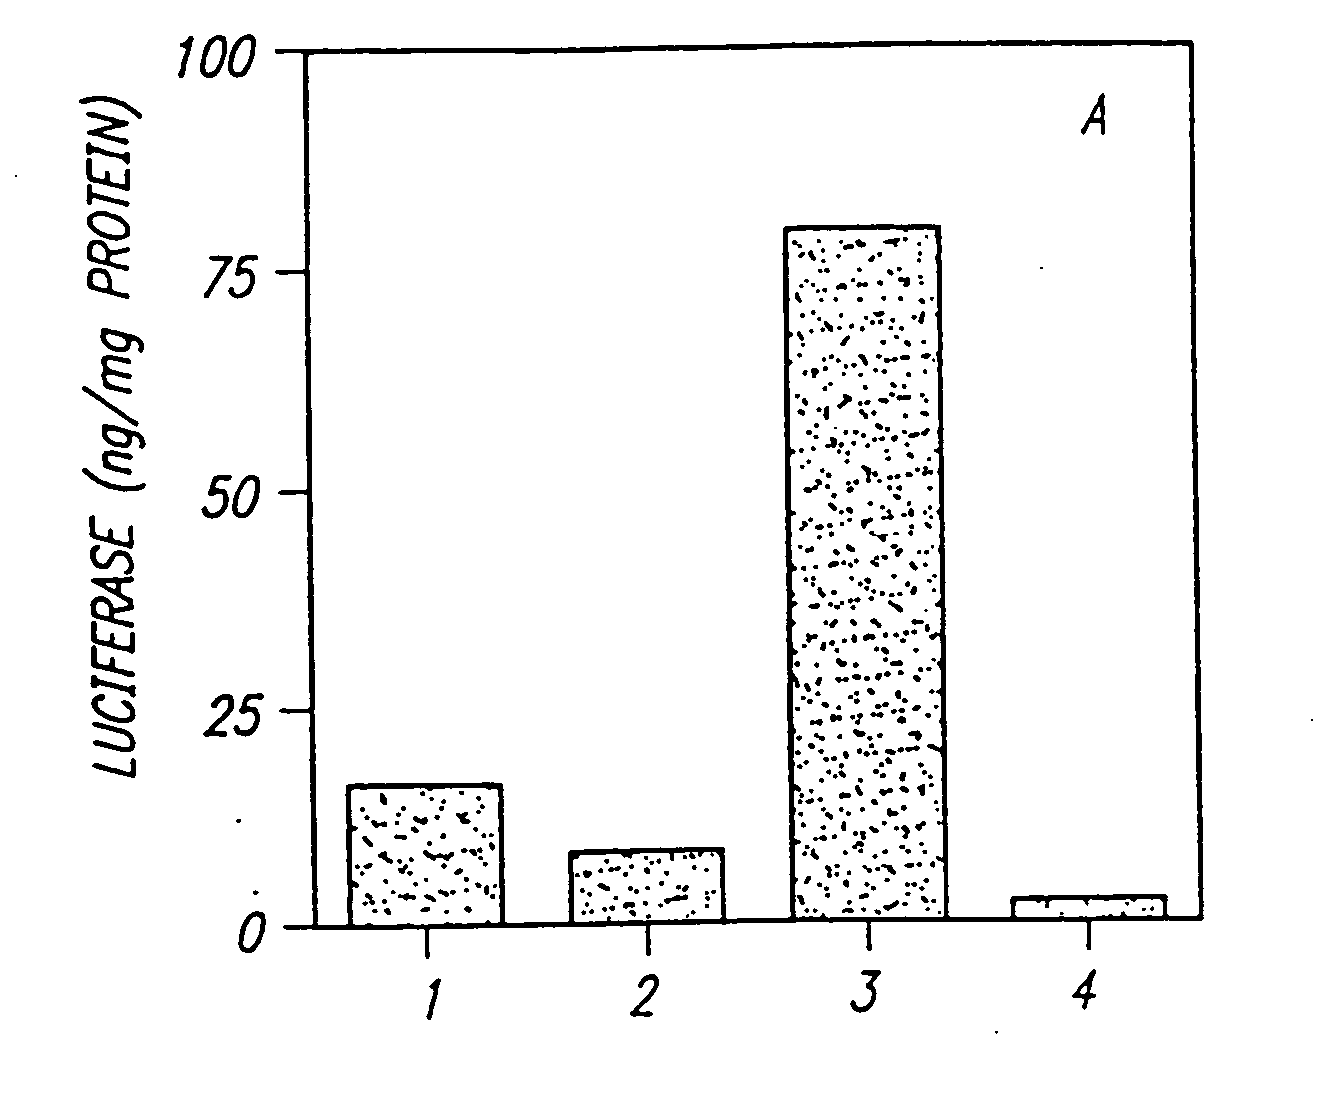 Methods of forming targeted liposomes loaded with a therapeutic agent